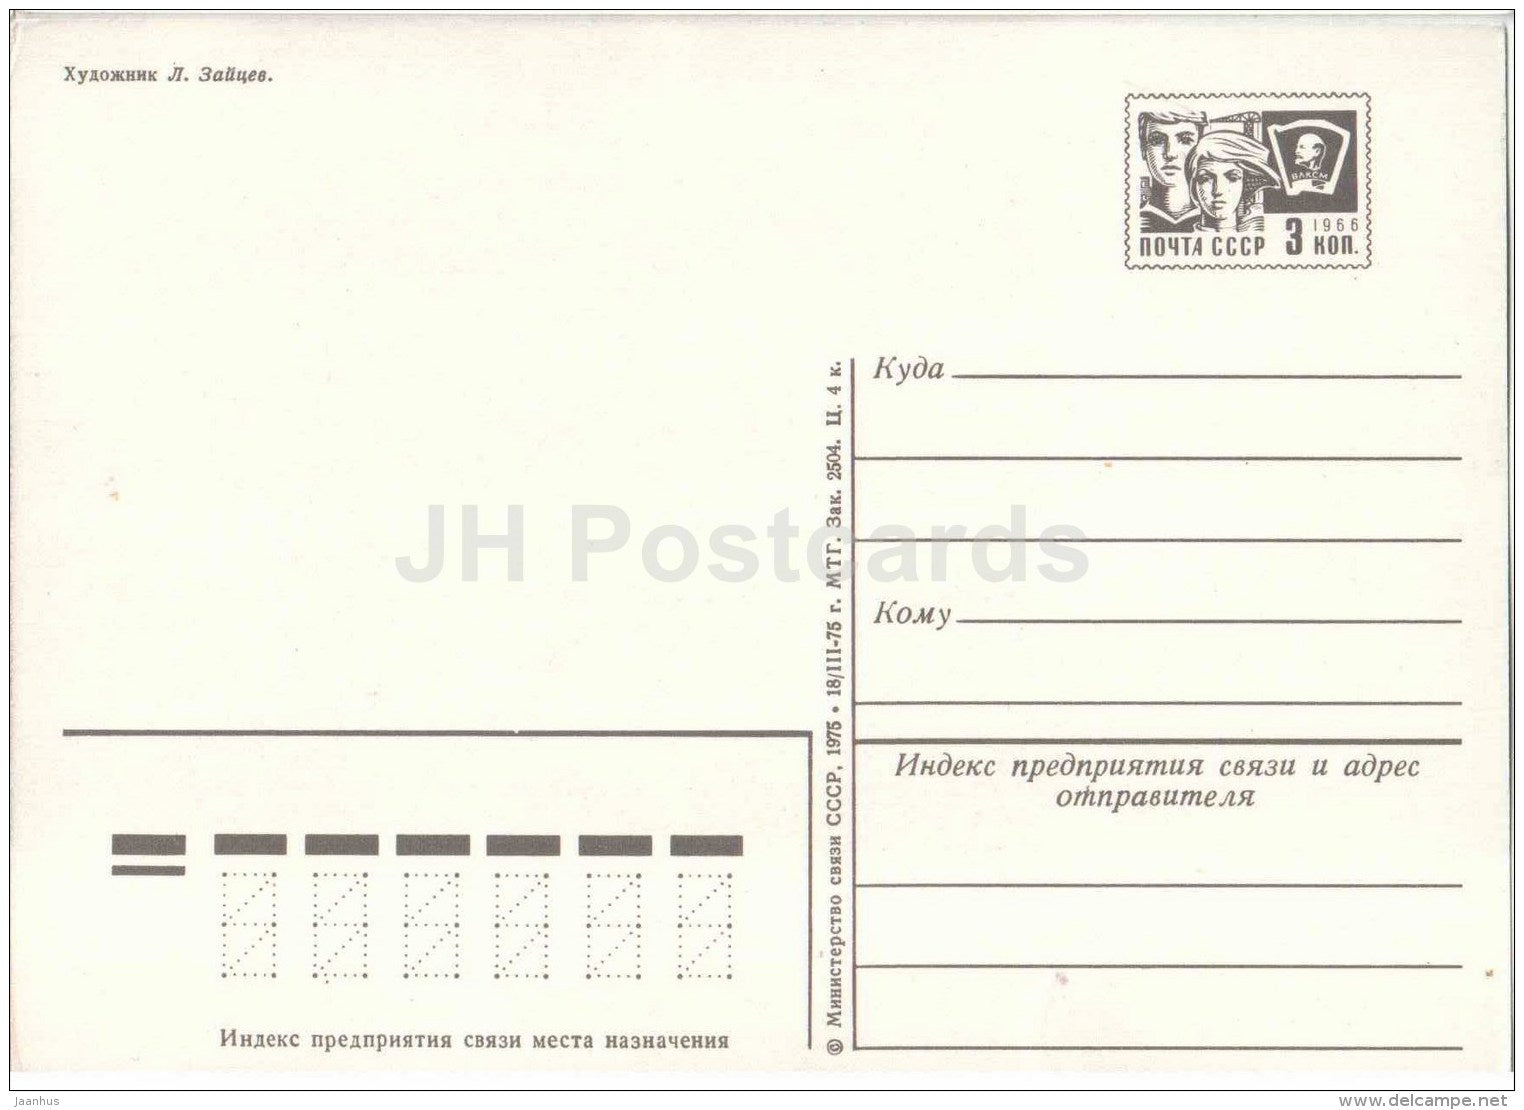 New Year Greeting card by L. Zaytsev - troika - horses - Ded Moroz - postal stationery - 1975 - Russia USSR - unused - JH Postcards